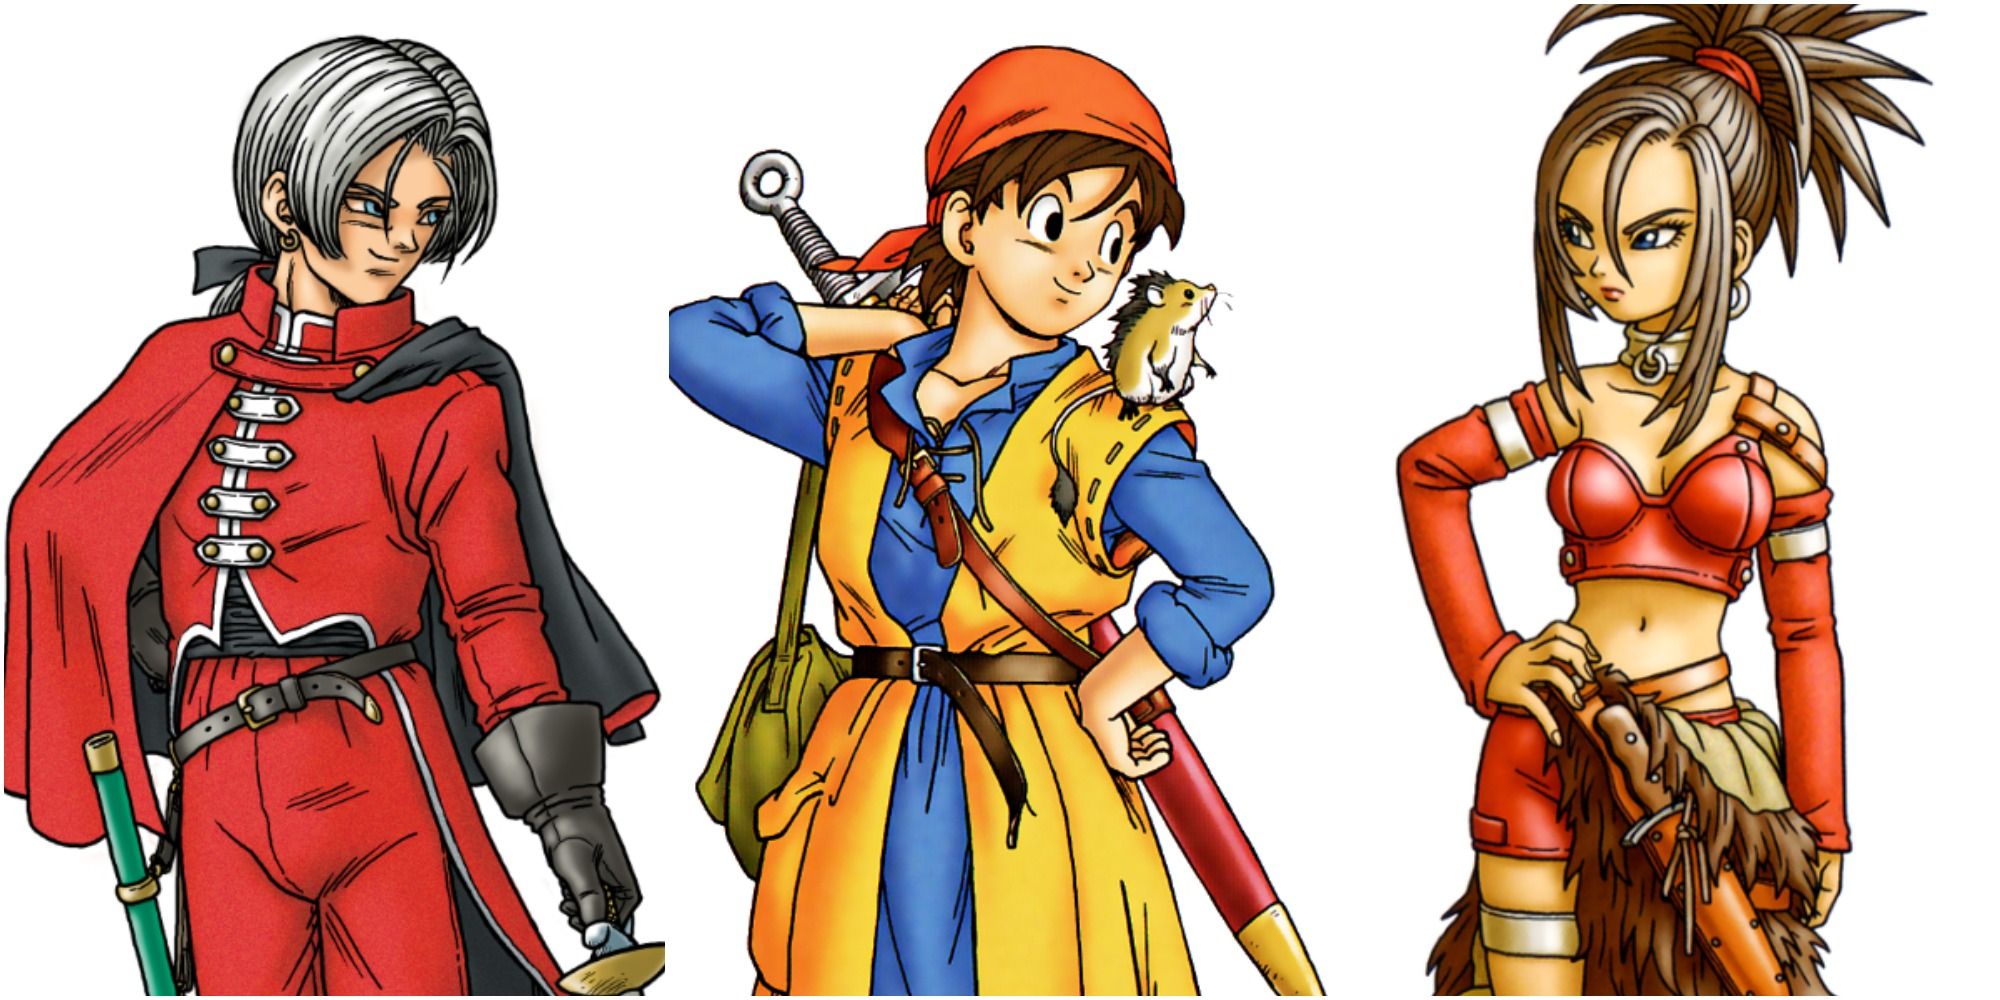 Angelo, Hero aka Eight, and Red from Dragon Quest 8: Journey of the Cursed King